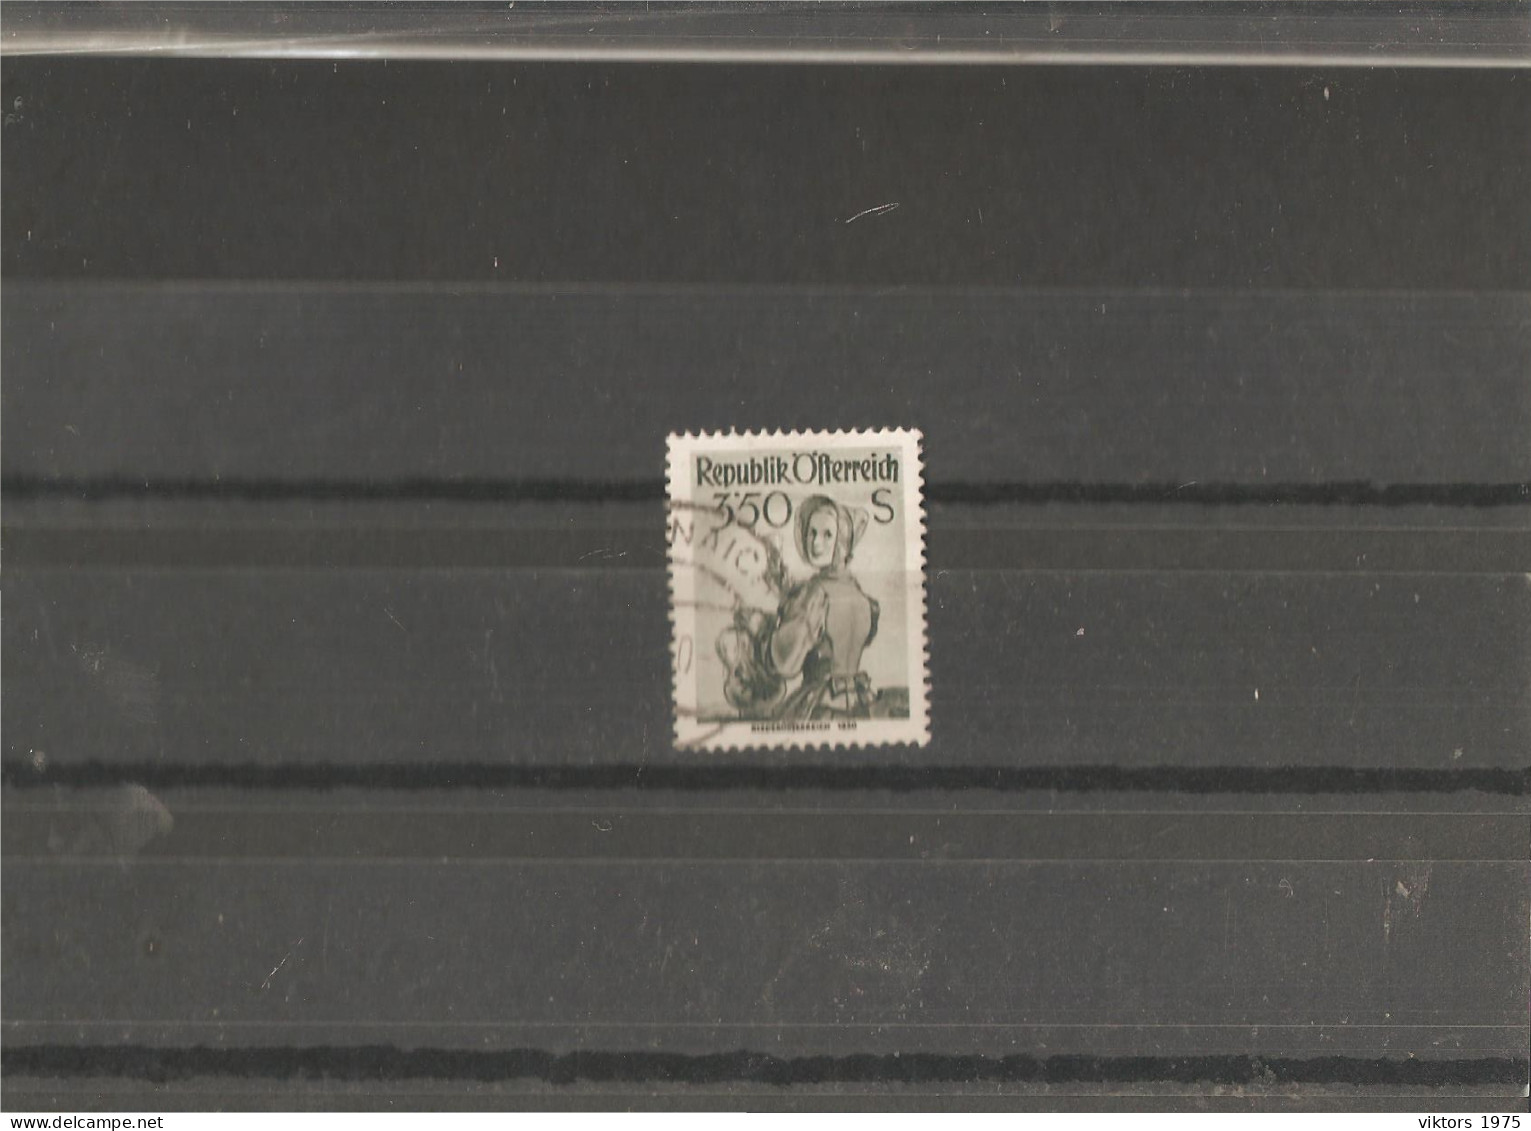 Used Stamp Nr.923 In MICHEL Catalog - Used Stamps